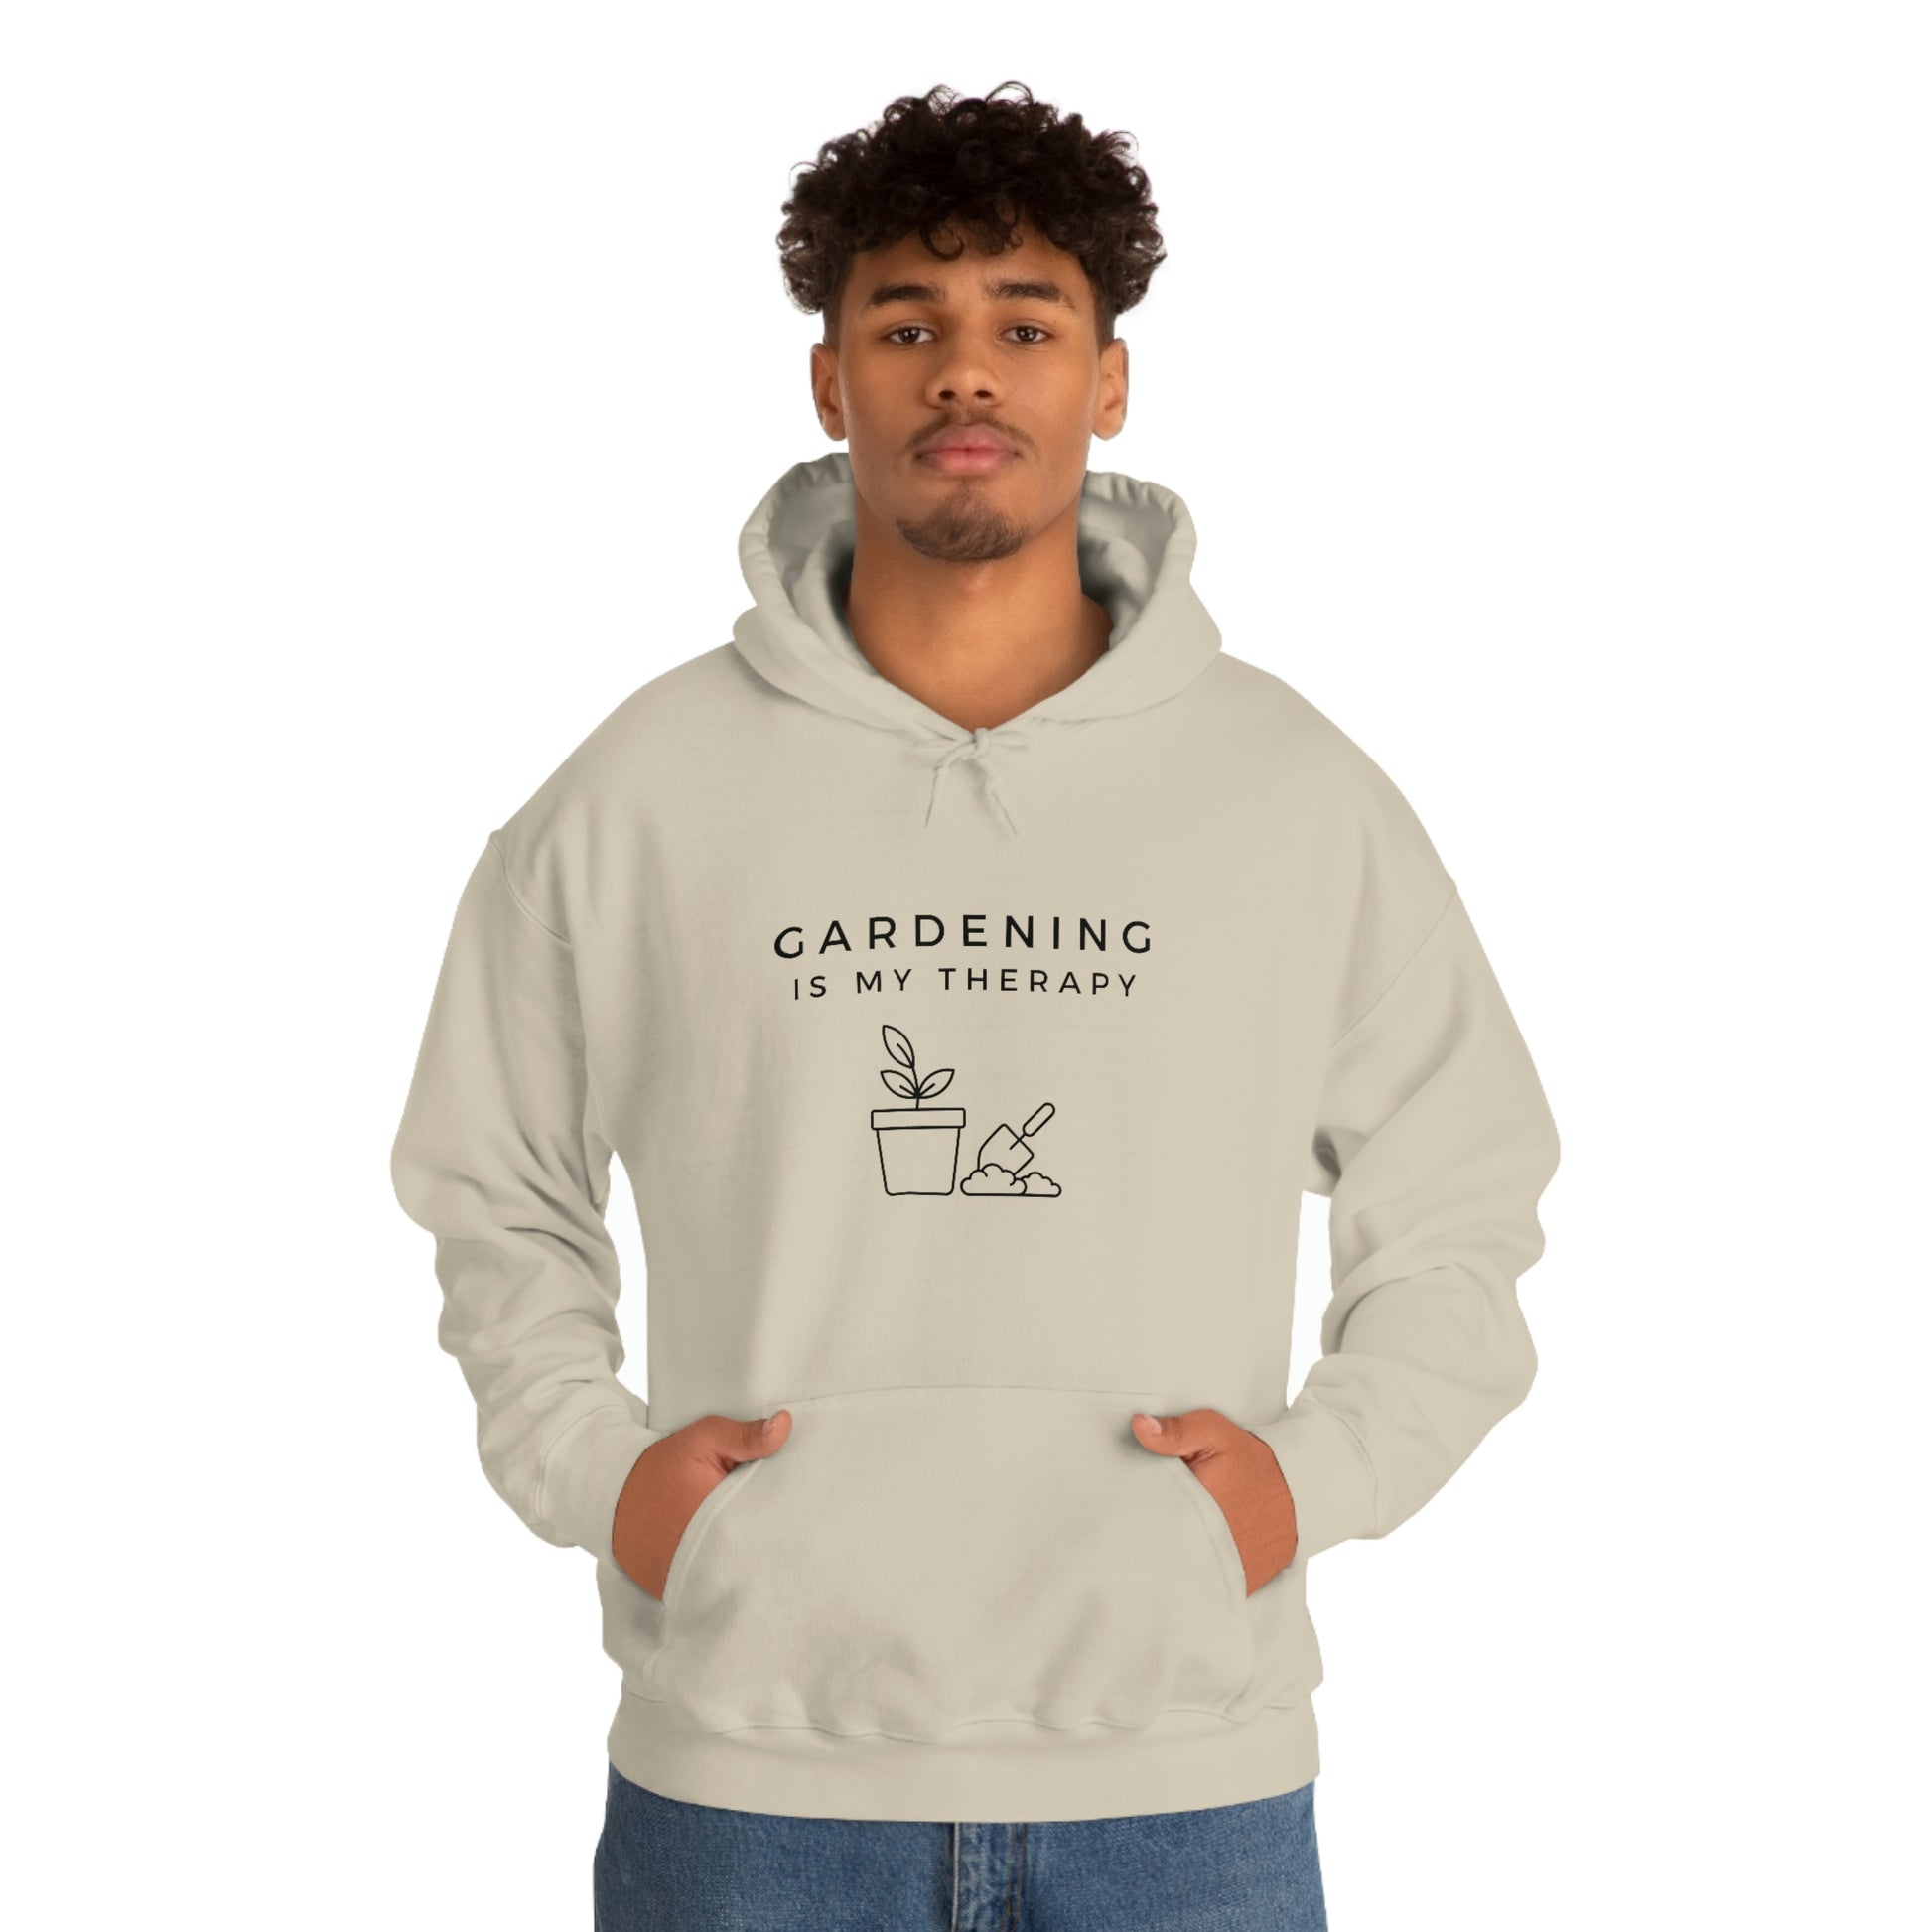 "Gardening Is My Therapy" Hoodie - Weave Got Gifts - Unique Gifts You Won’t Find Anywhere Else!